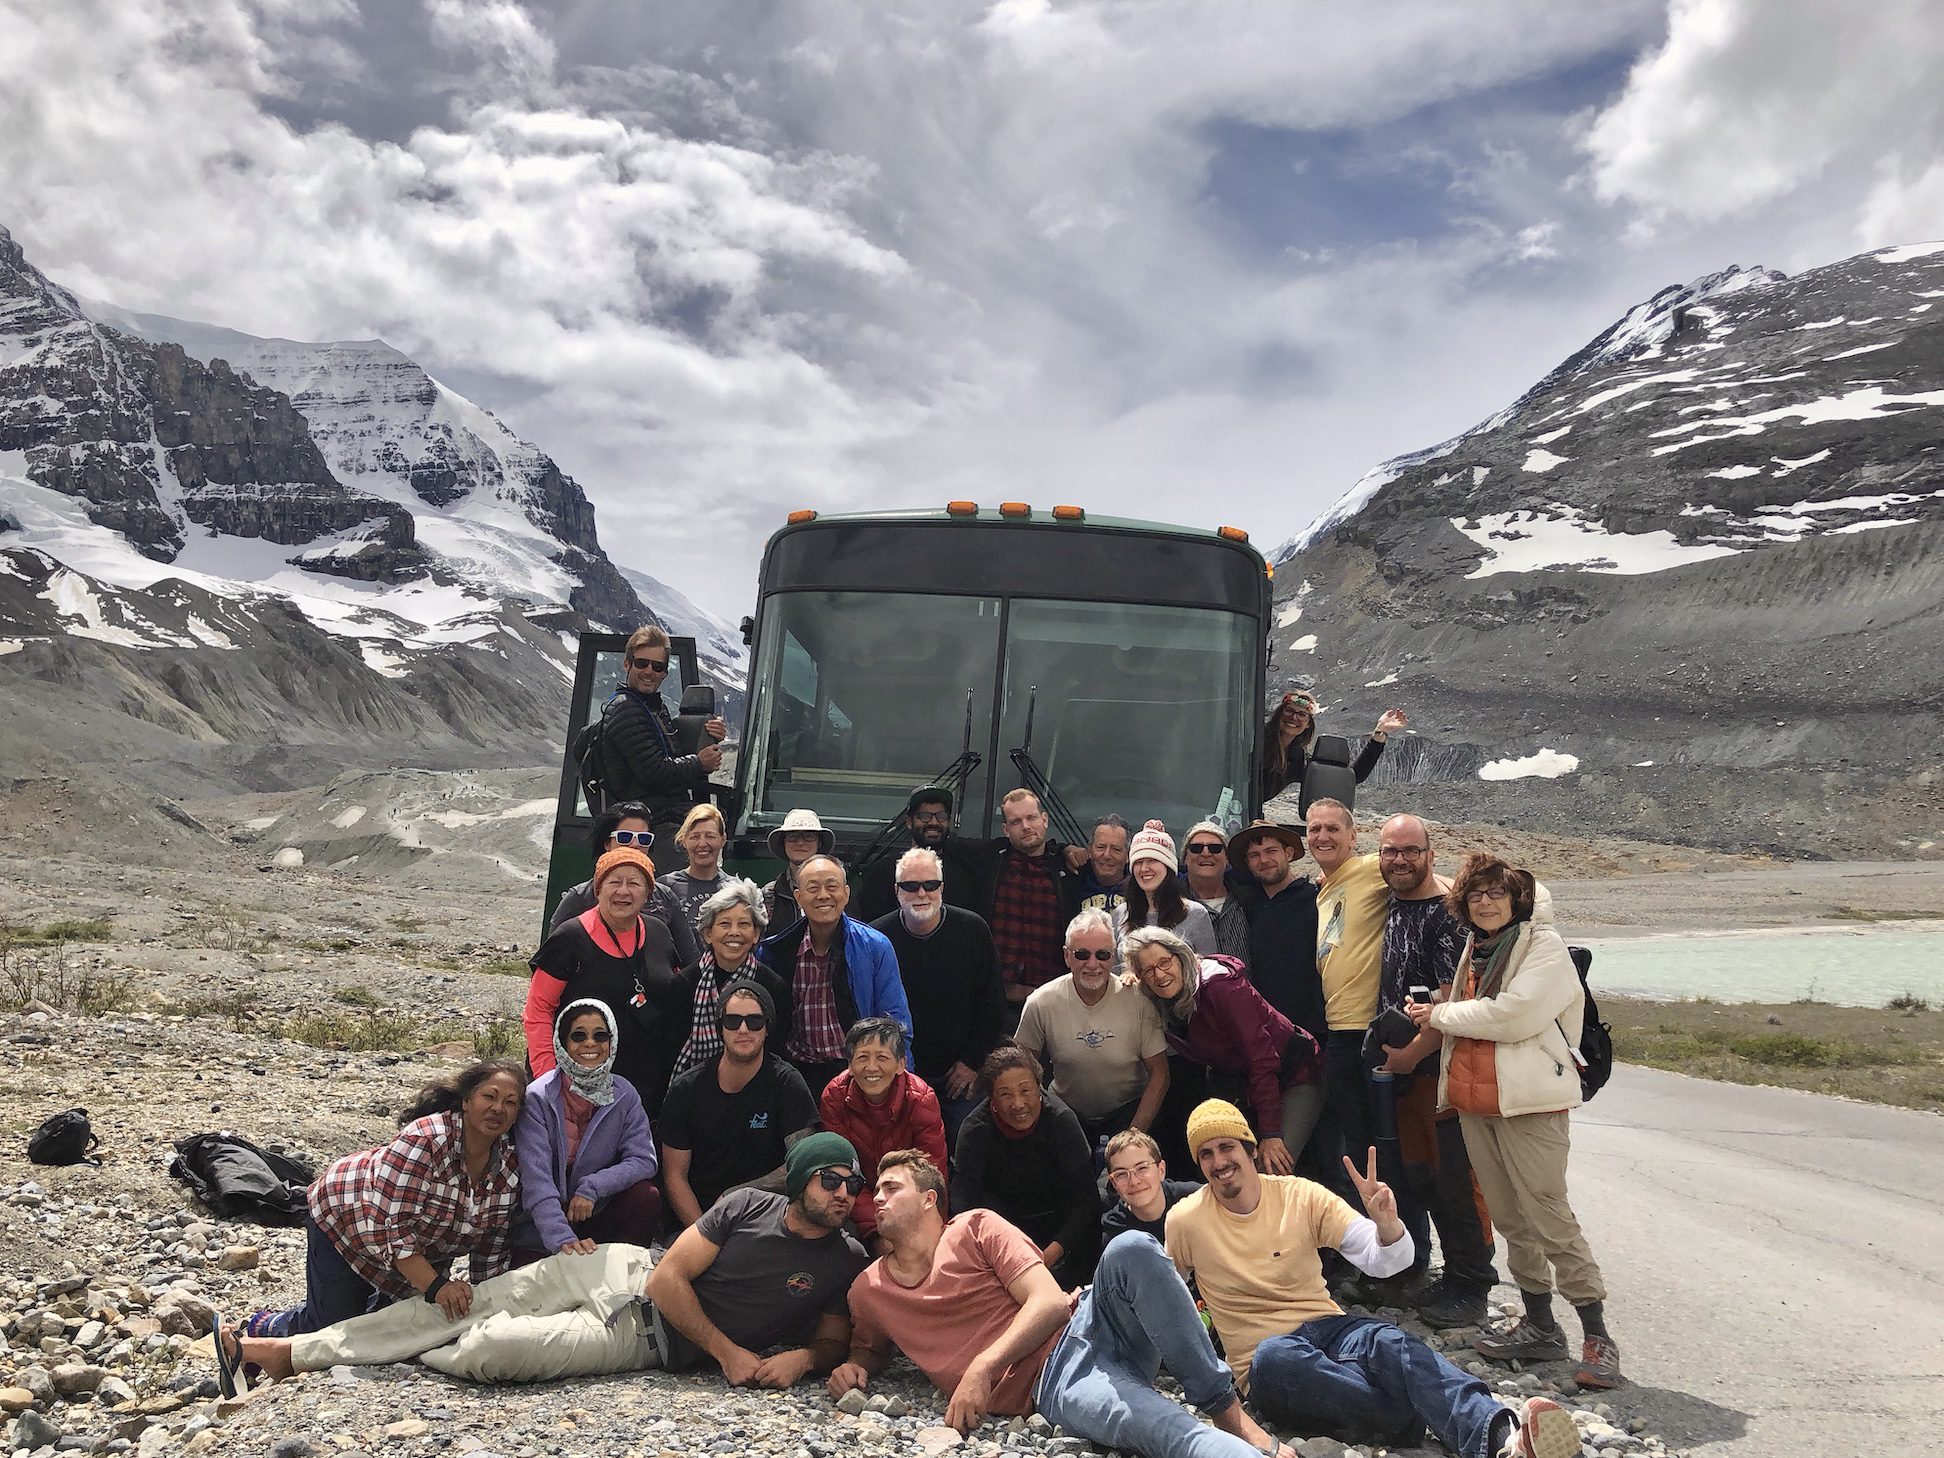 Alaska group poses in front of their adventure coach at the face of a glacier.